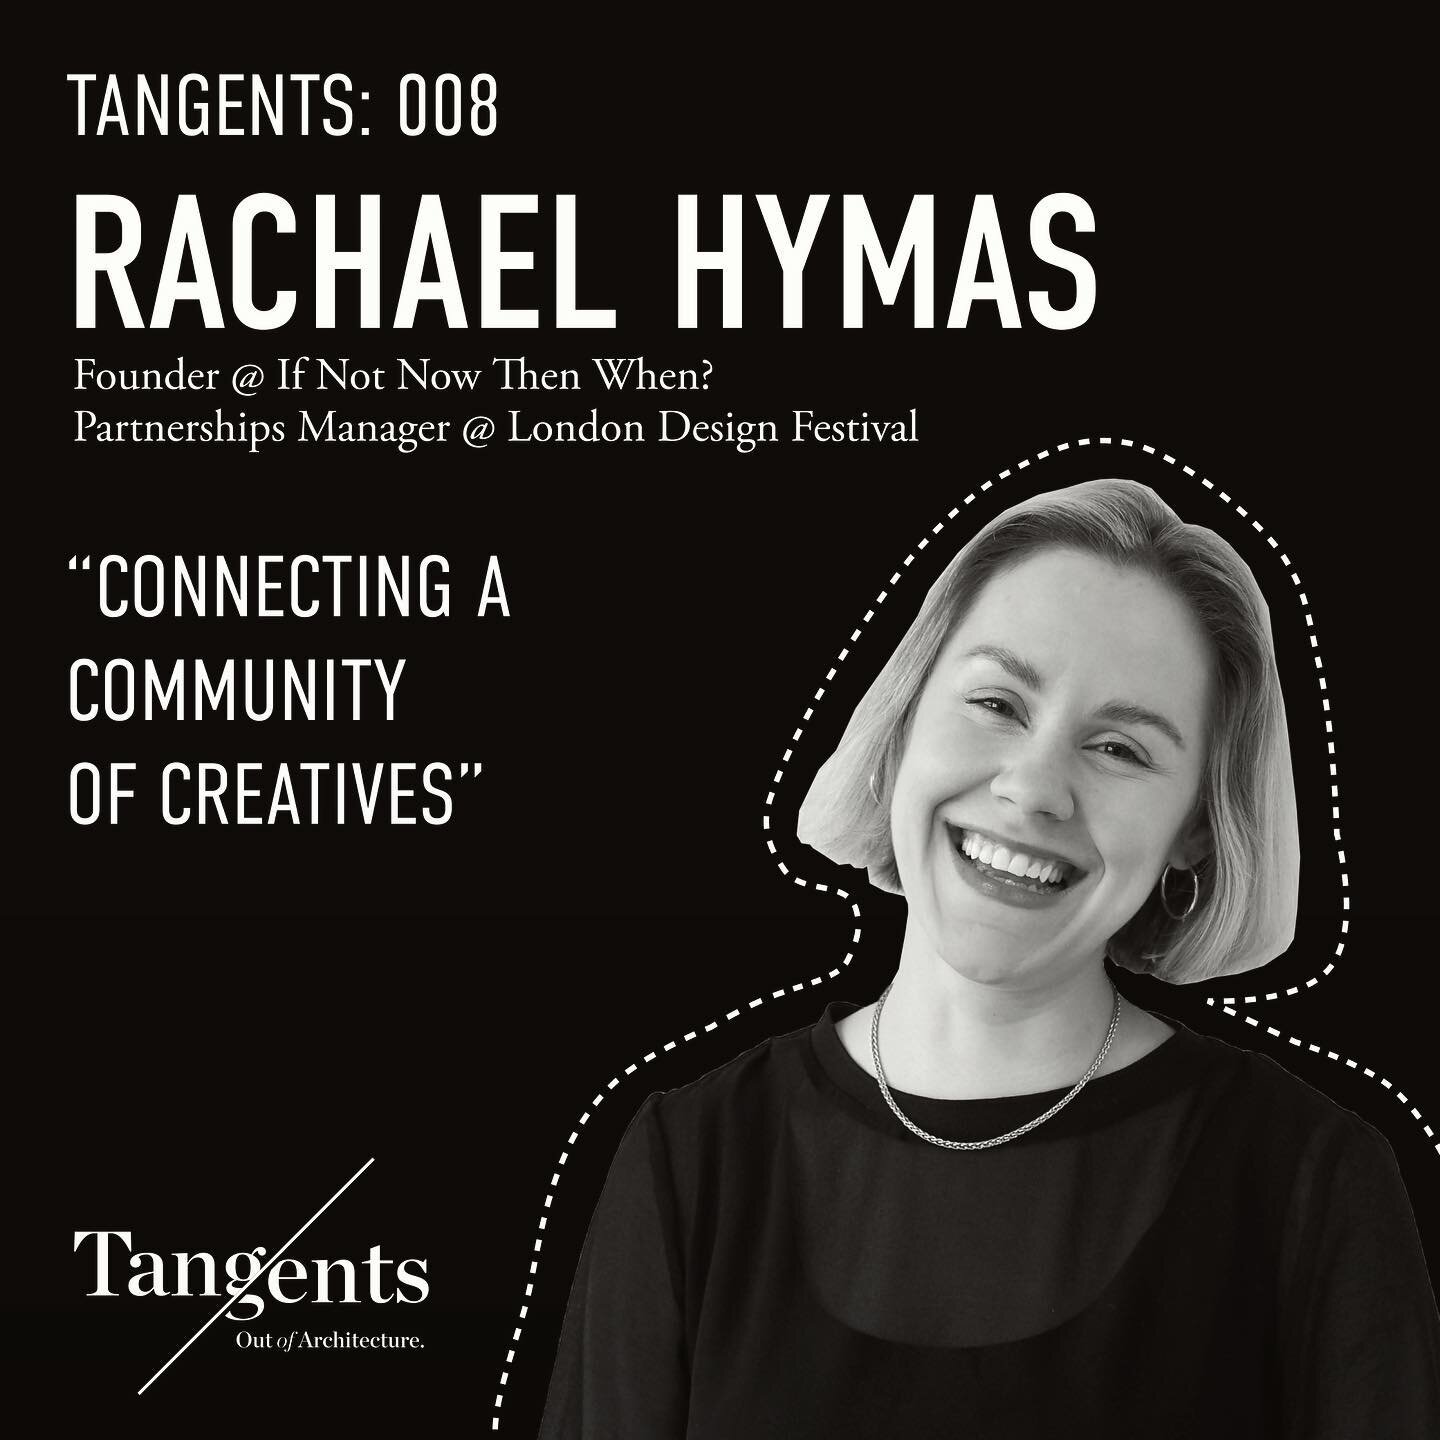 I&rsquo;m honoured to announce that I&rsquo;m featuring on the latest US-based Tangents podcast series!
-
In 2021, the &lsquo;If Not Now Then When?&rsquo; podcast went transatlantic and I had the chance to speak with the incredible Future Designs tea